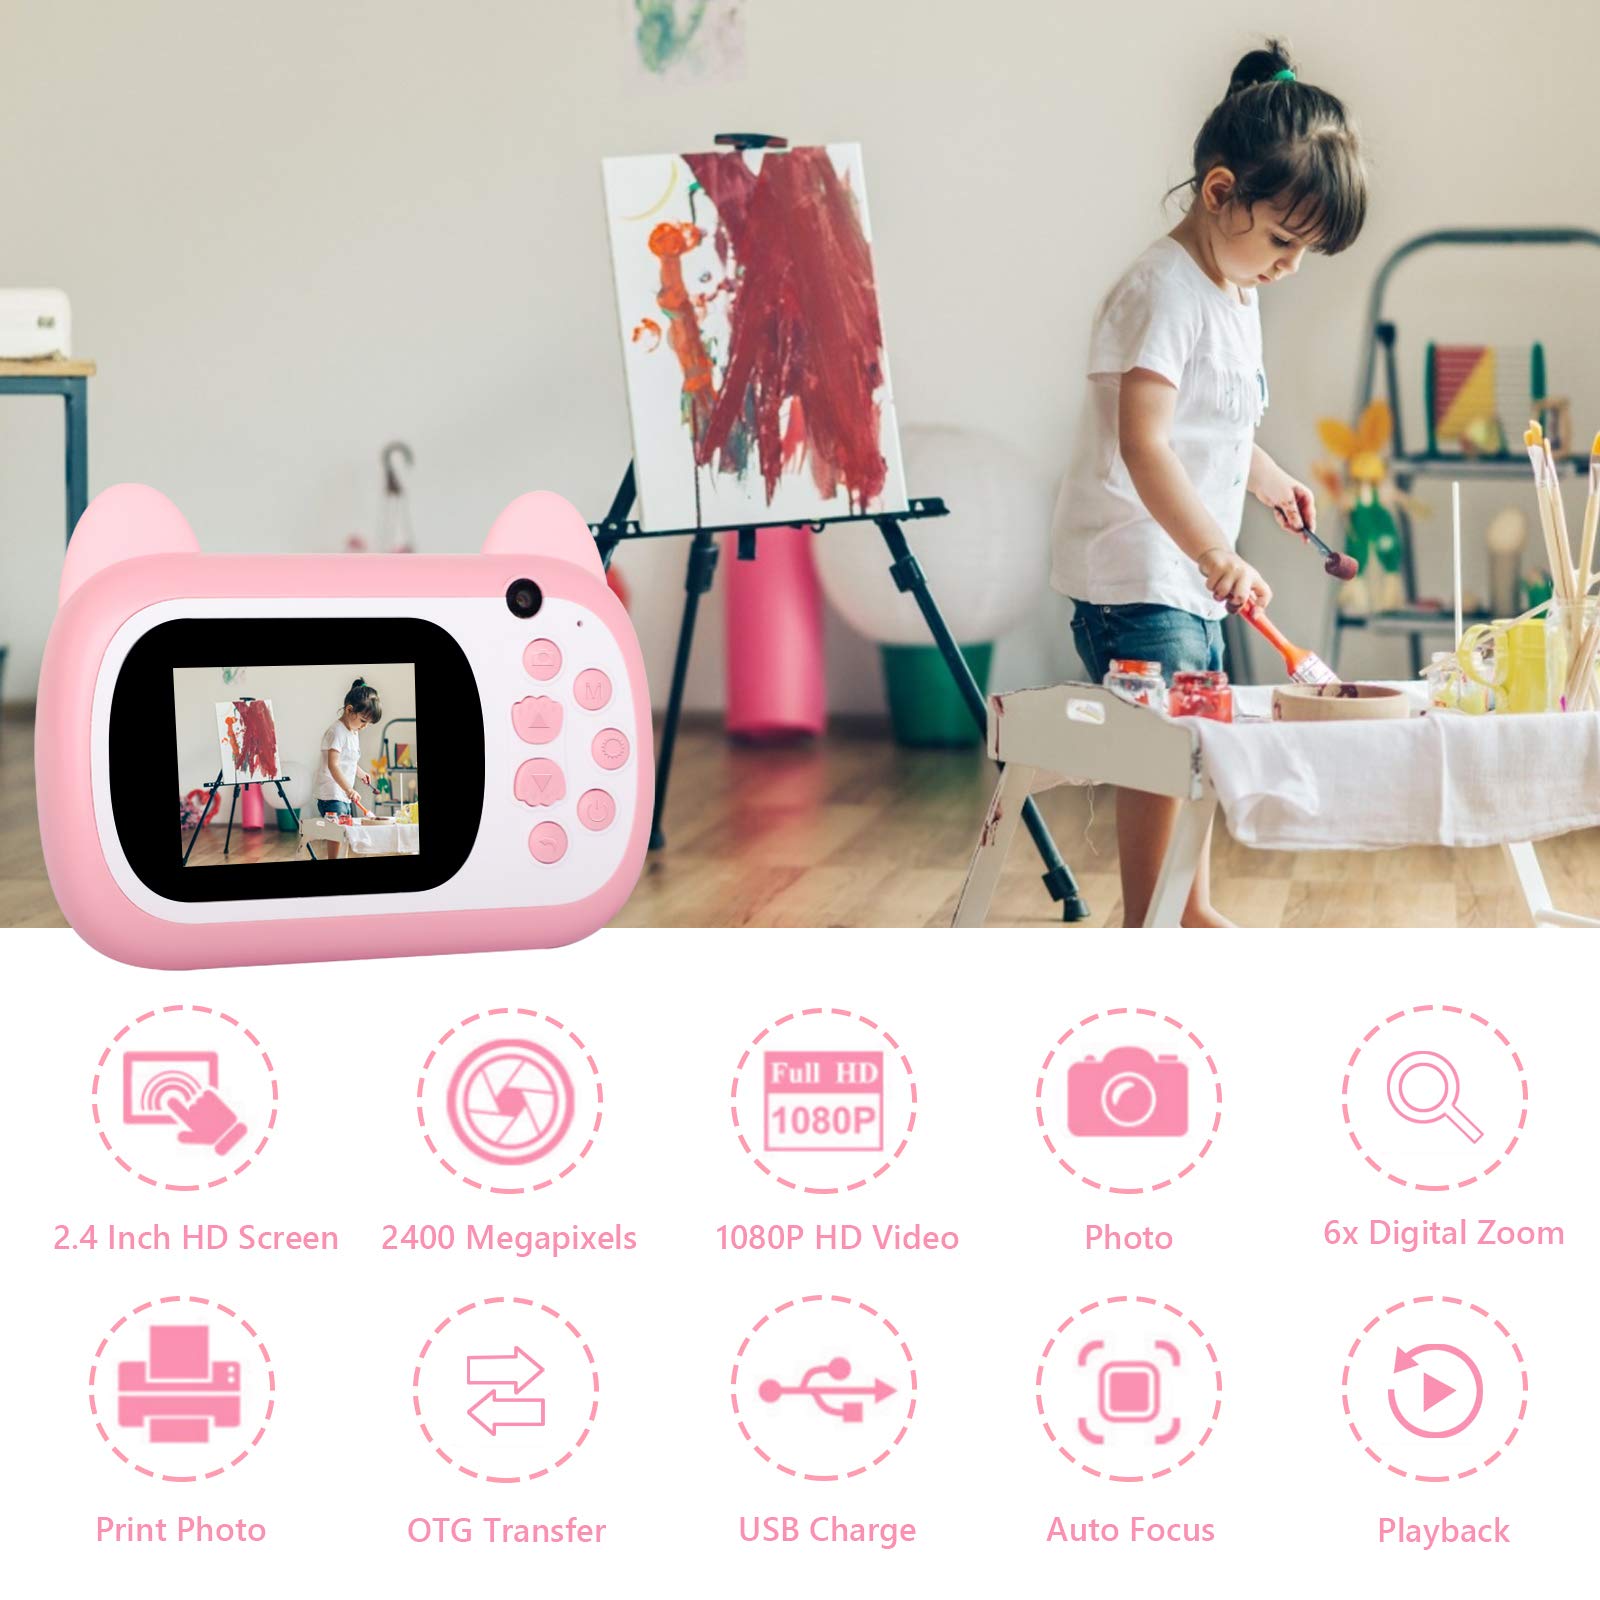 TOYOGO Instant Print Camera for Kids, Upgrade Selfie Kids Camera, Digital No Ink Video Camera with 3 Rolls Print Paper Camera, 1000 mAh,Dual Lens,1080P HD Video Recorder for Girls Boys Gifts Toys Pink